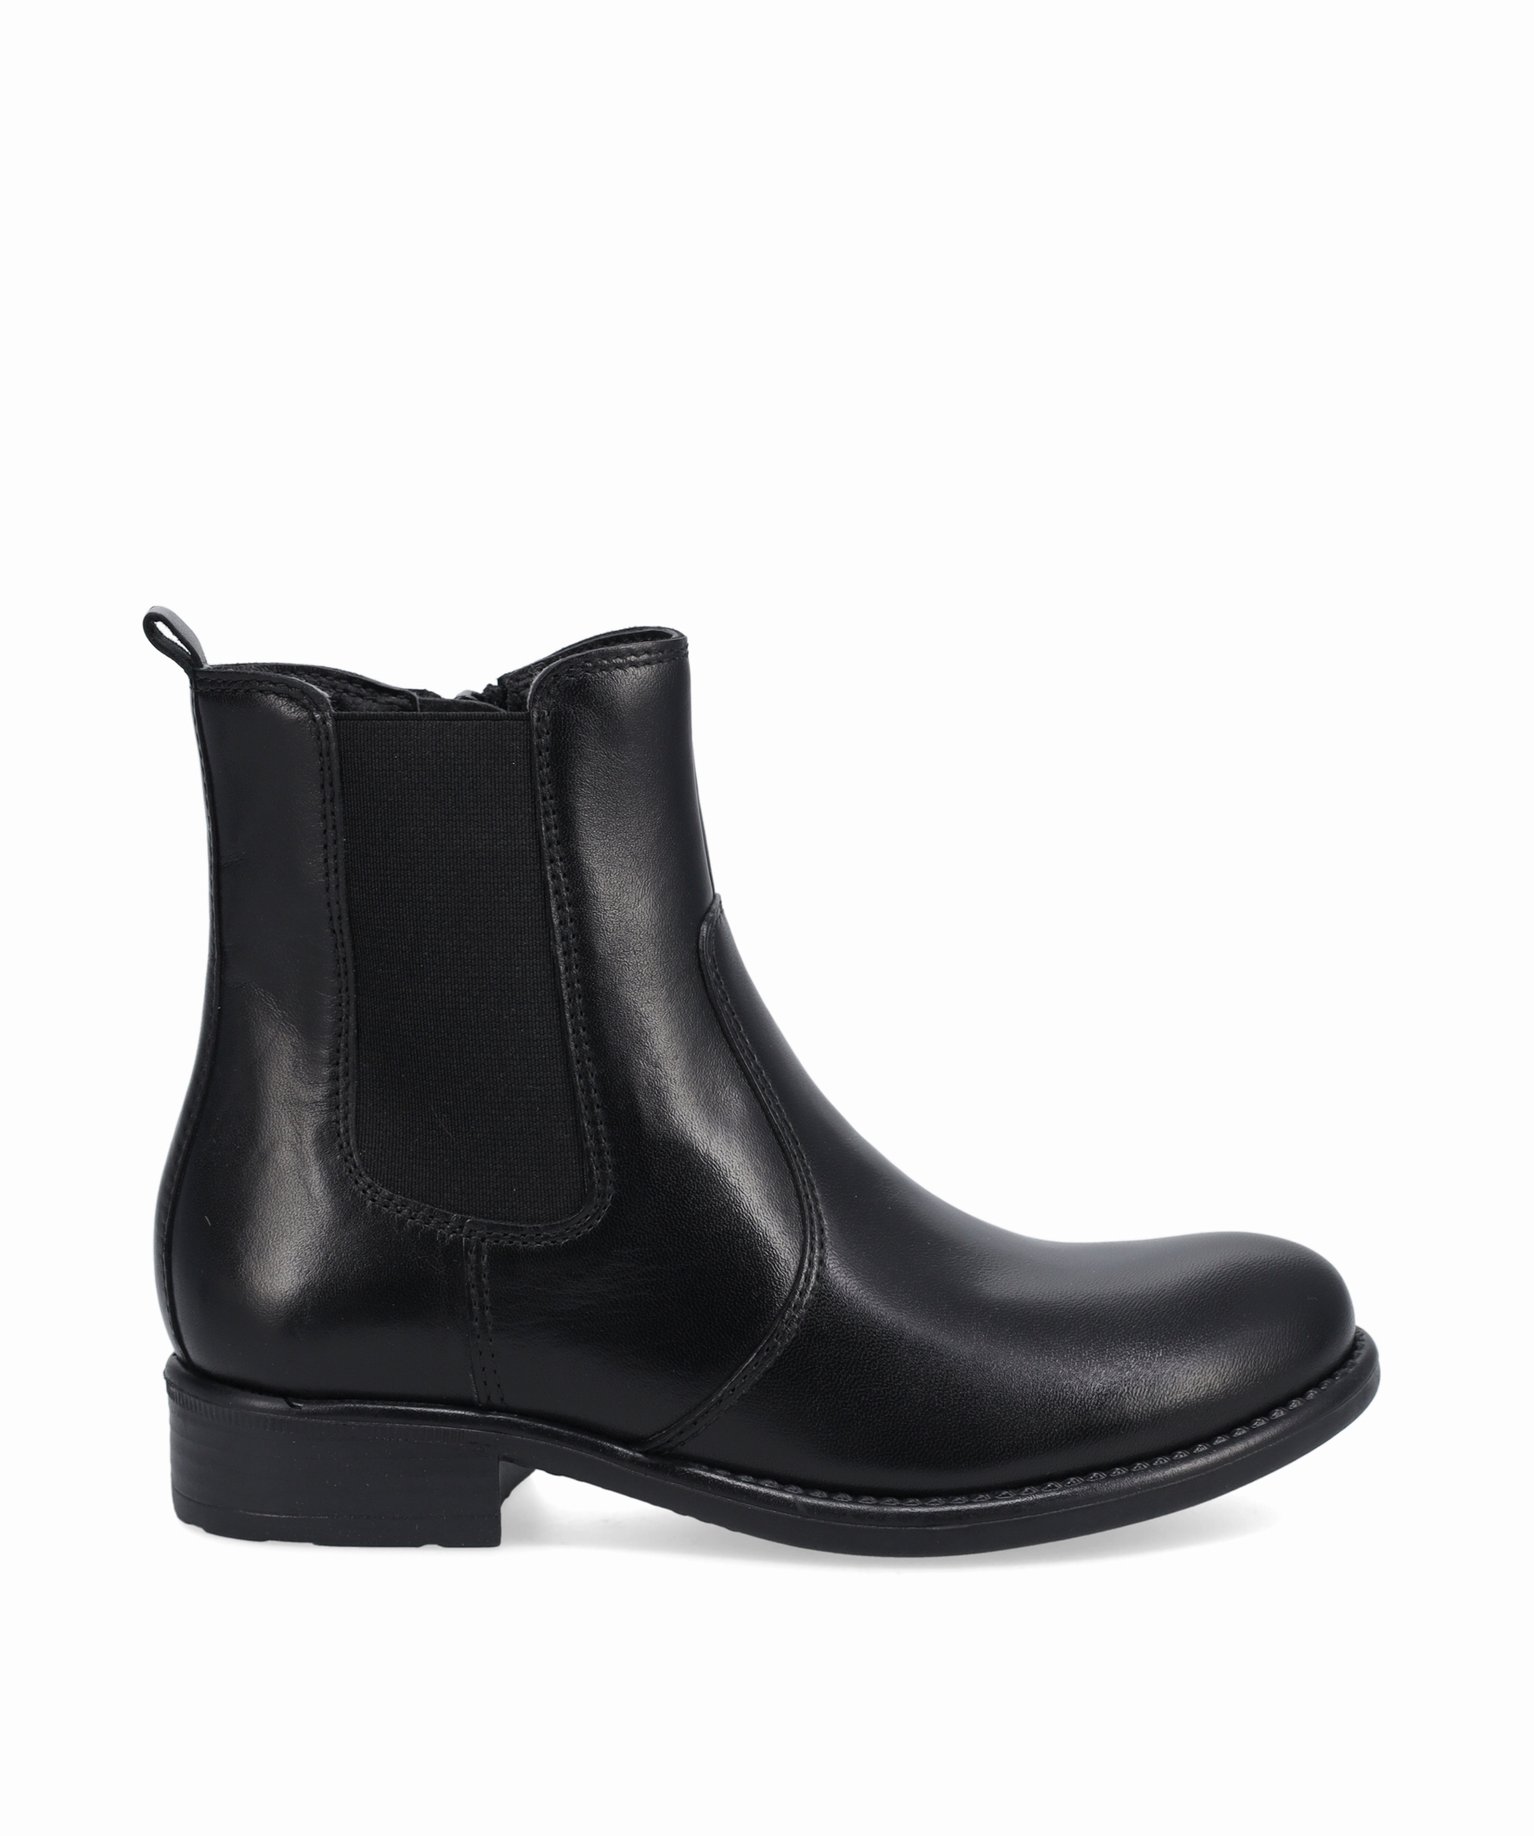 Boots fille style Chelsea unies dessus cuir - Tanéo - 32 - noir - TANEO